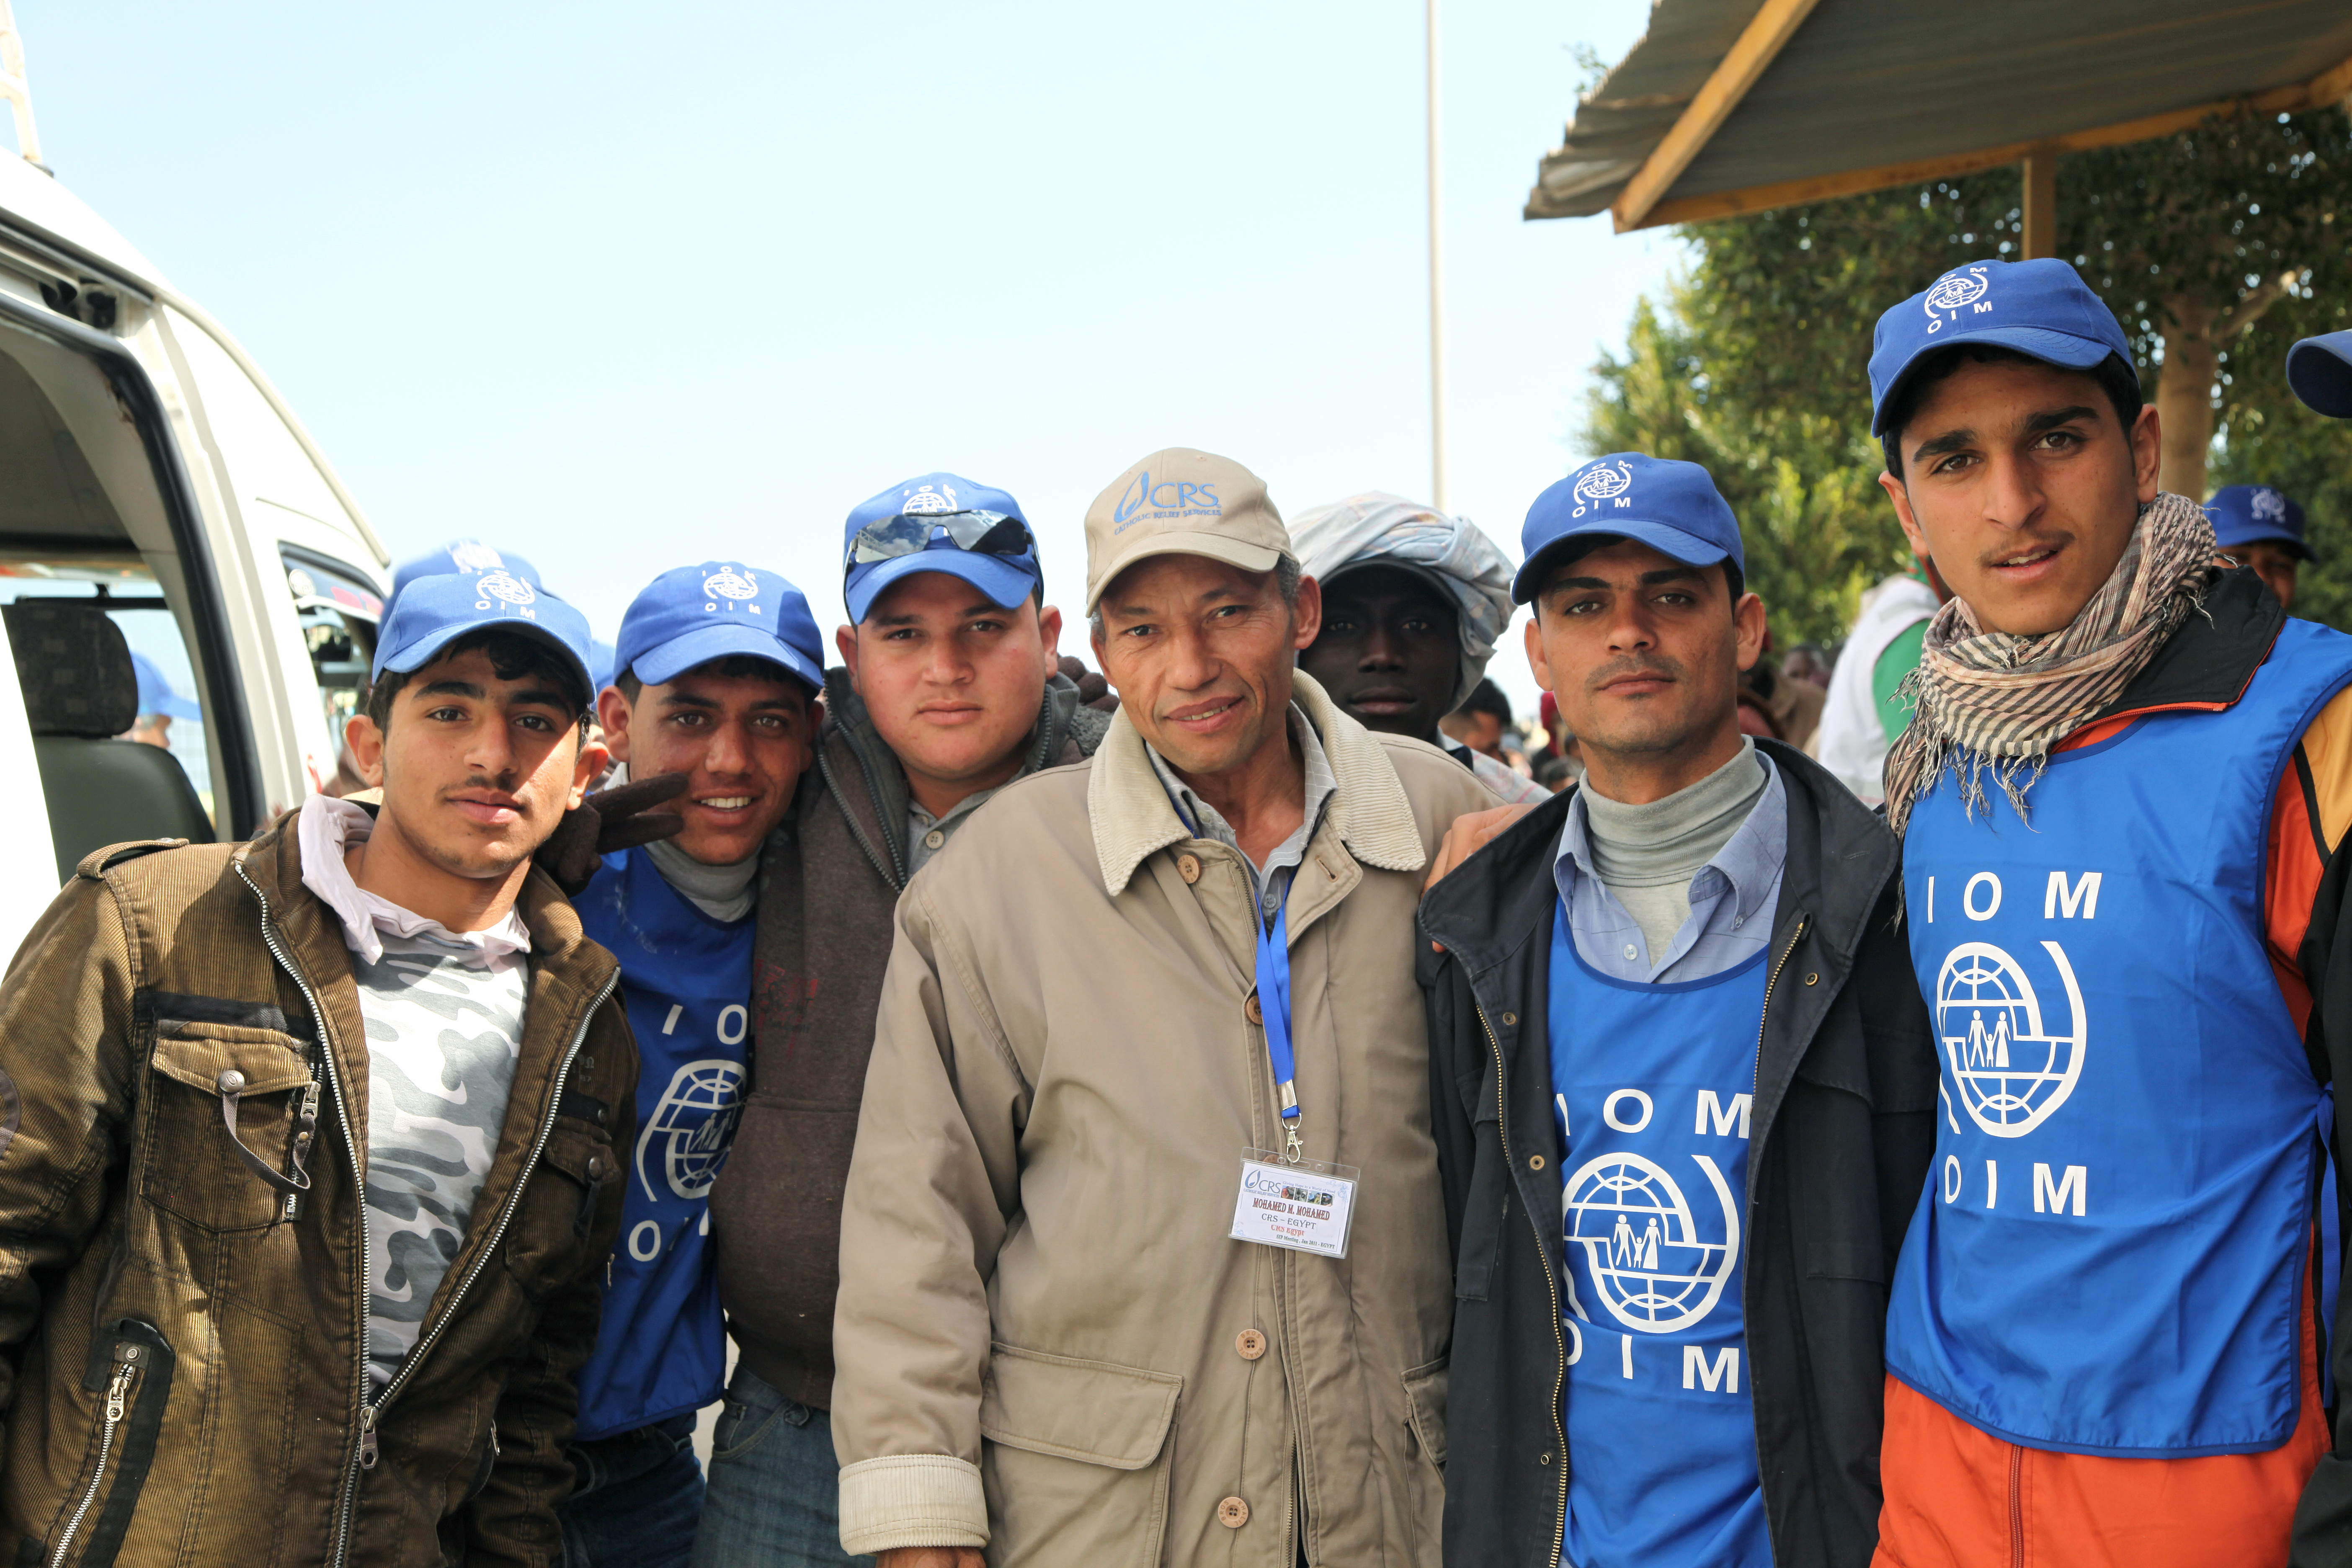 IOM un Migration. The United Nations Migration Agency. Volunteers assist Guests.